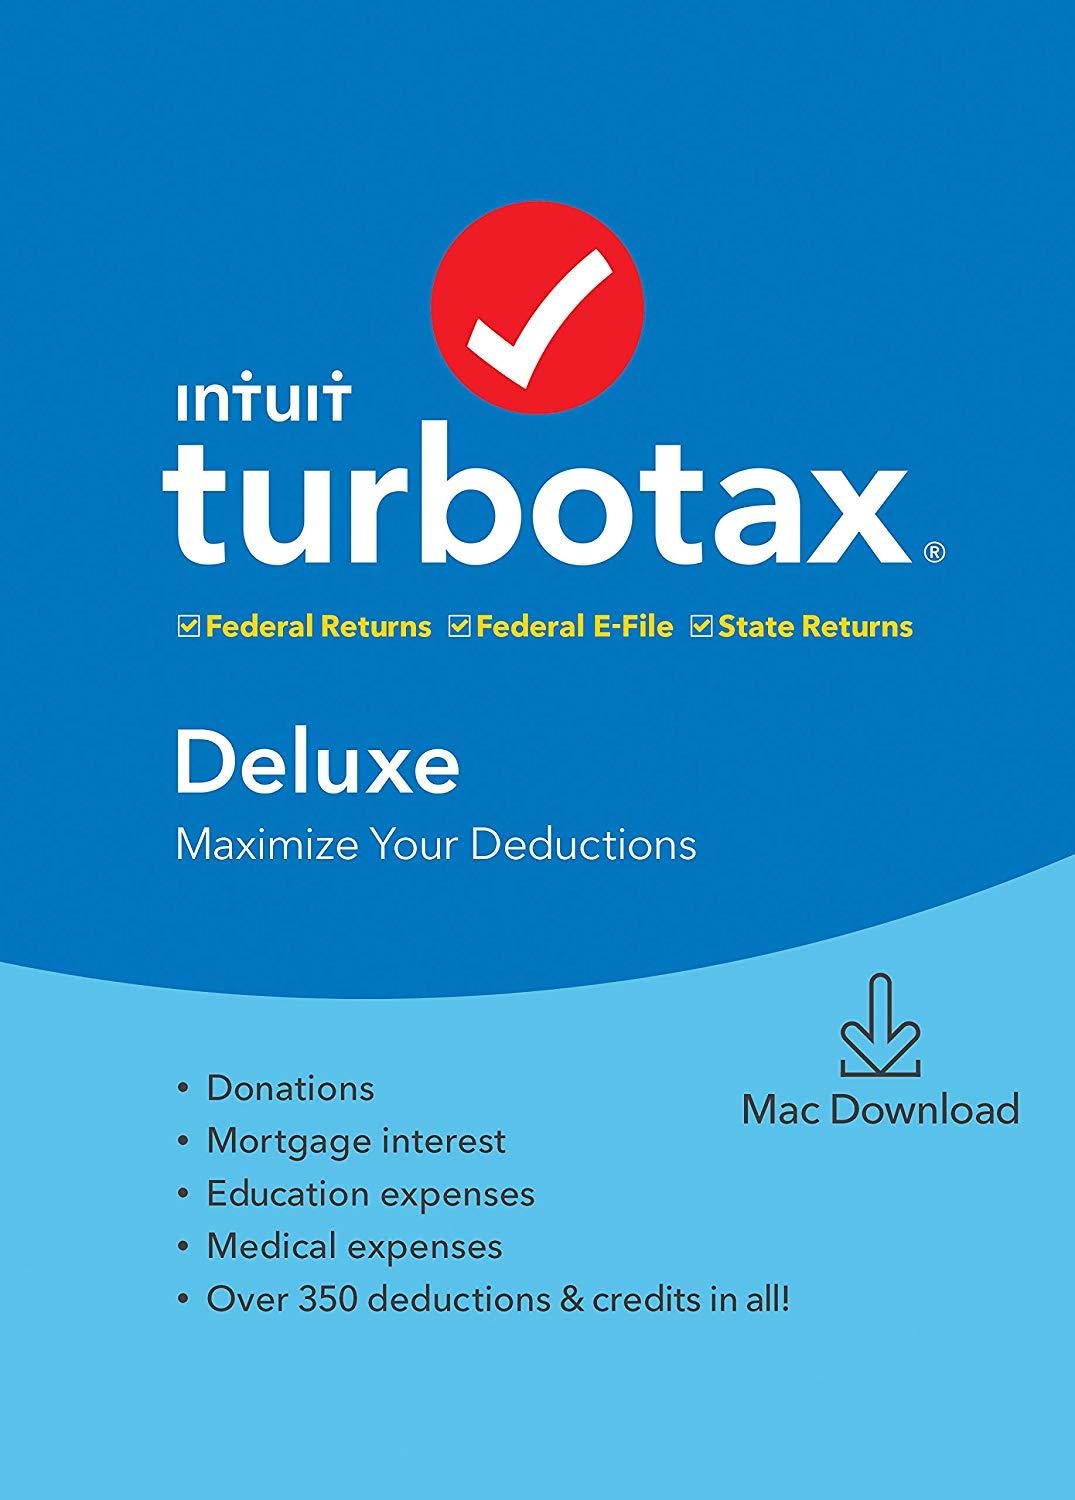 Examining the implications of TurboTax's misleading practices